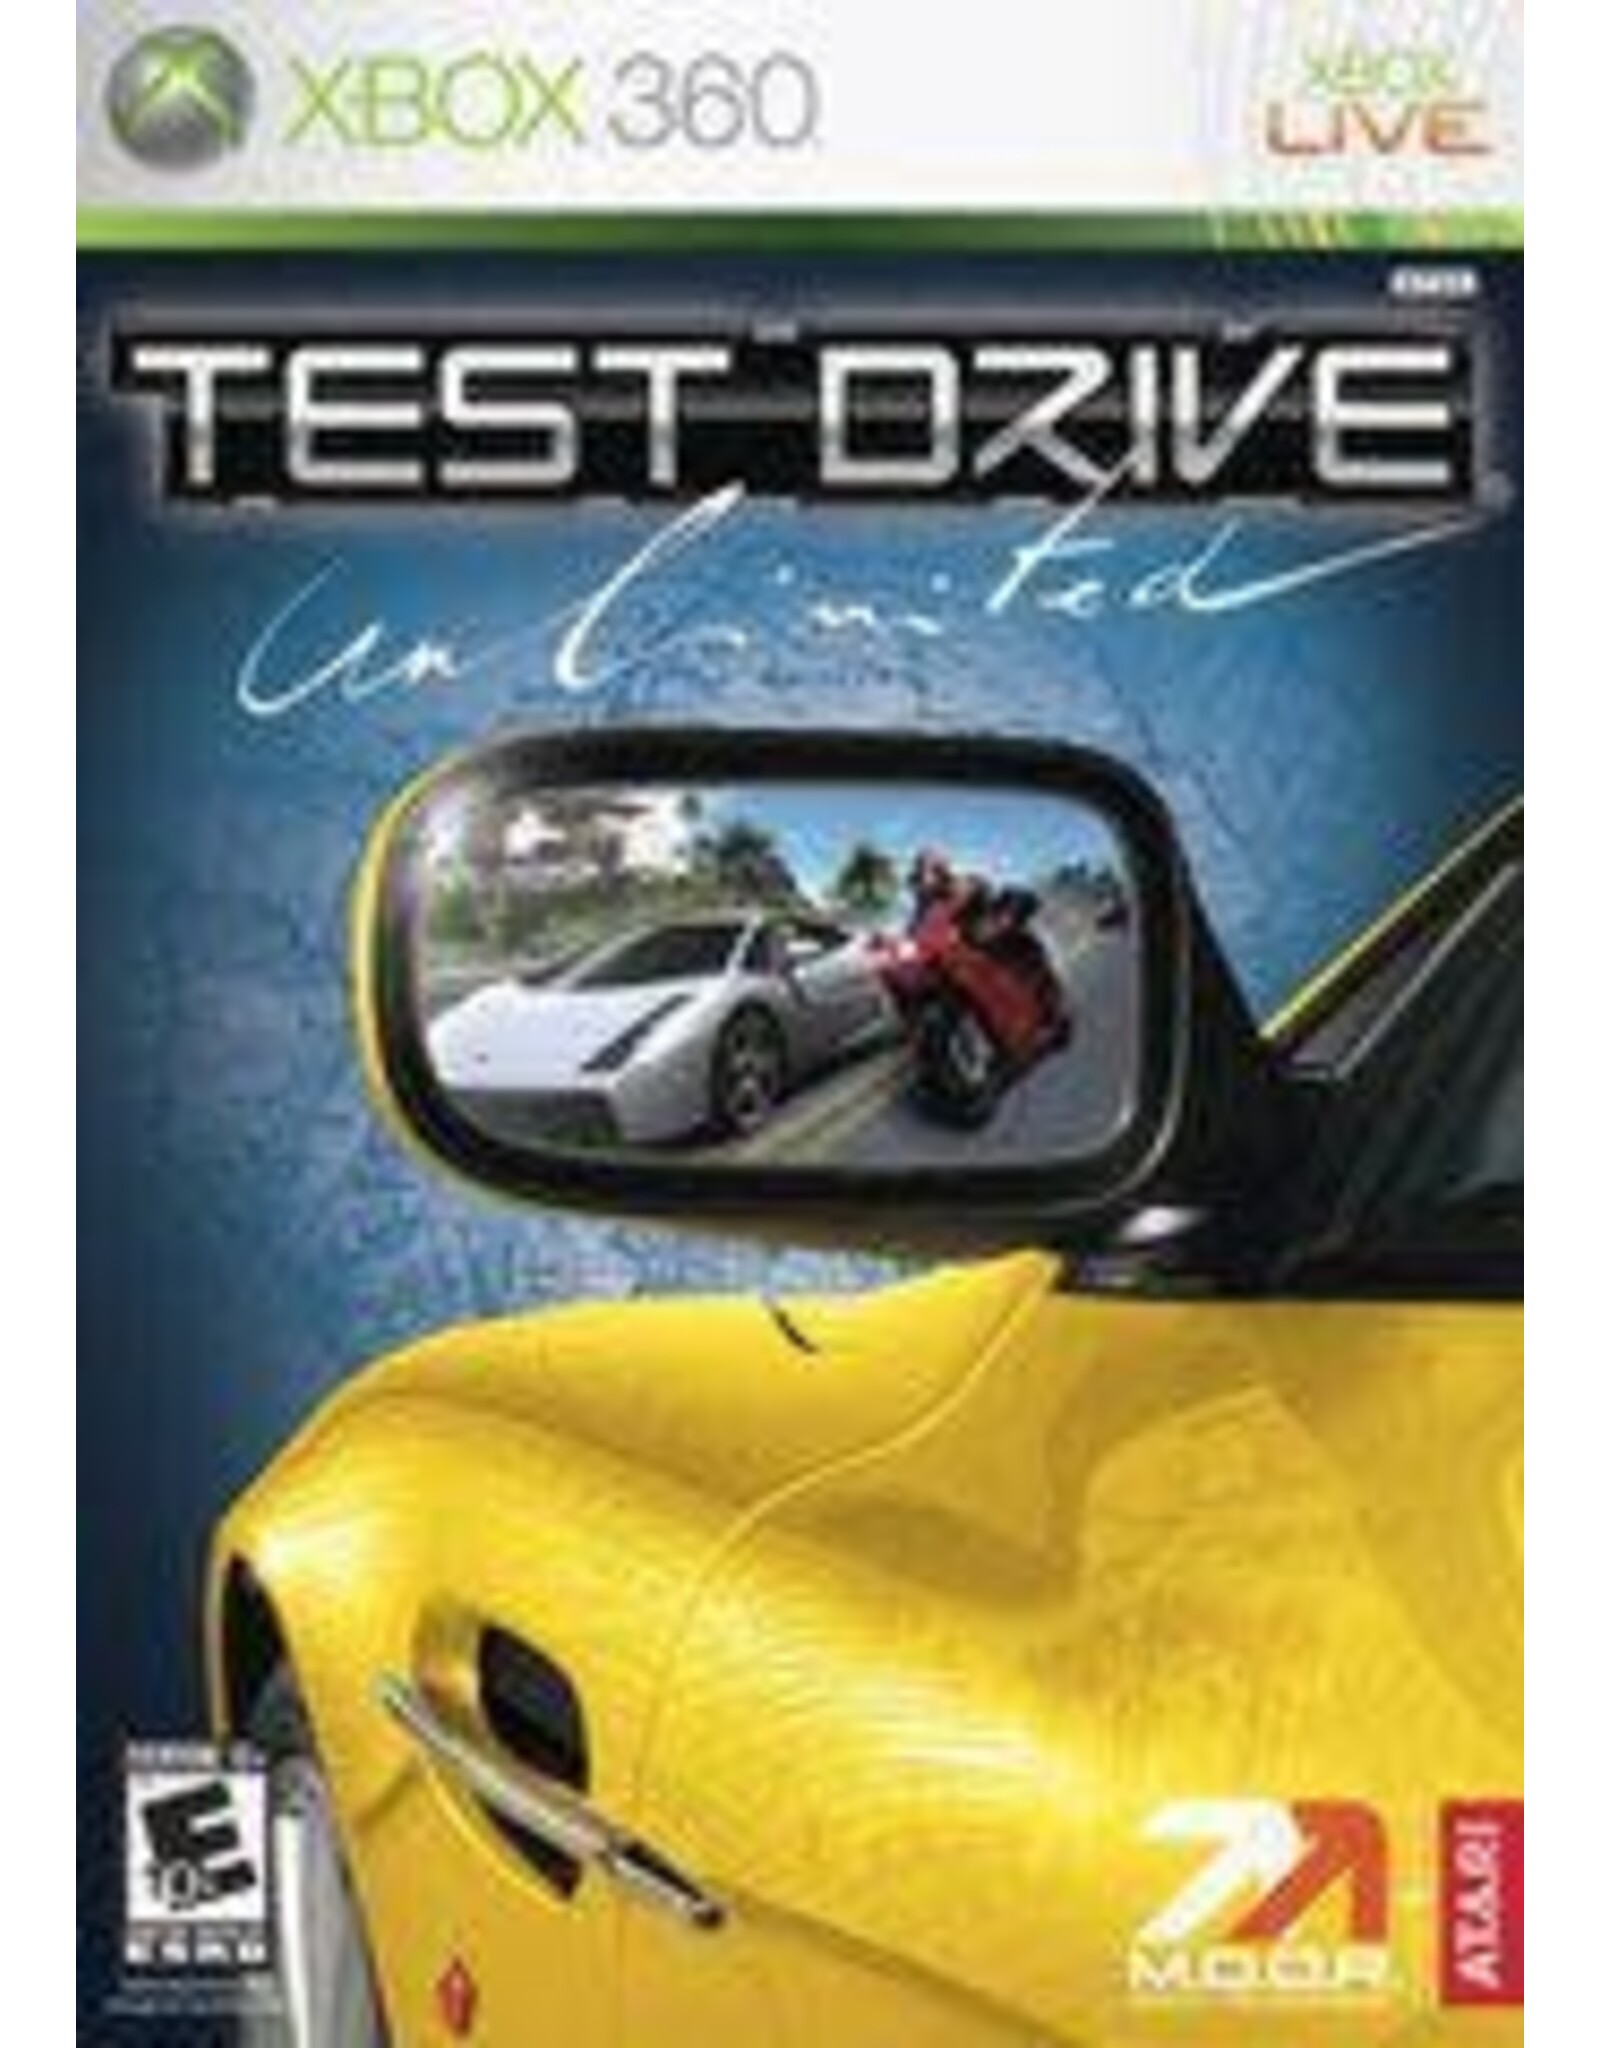 Xbox 360 Test Drive Unlimited (No Manual)